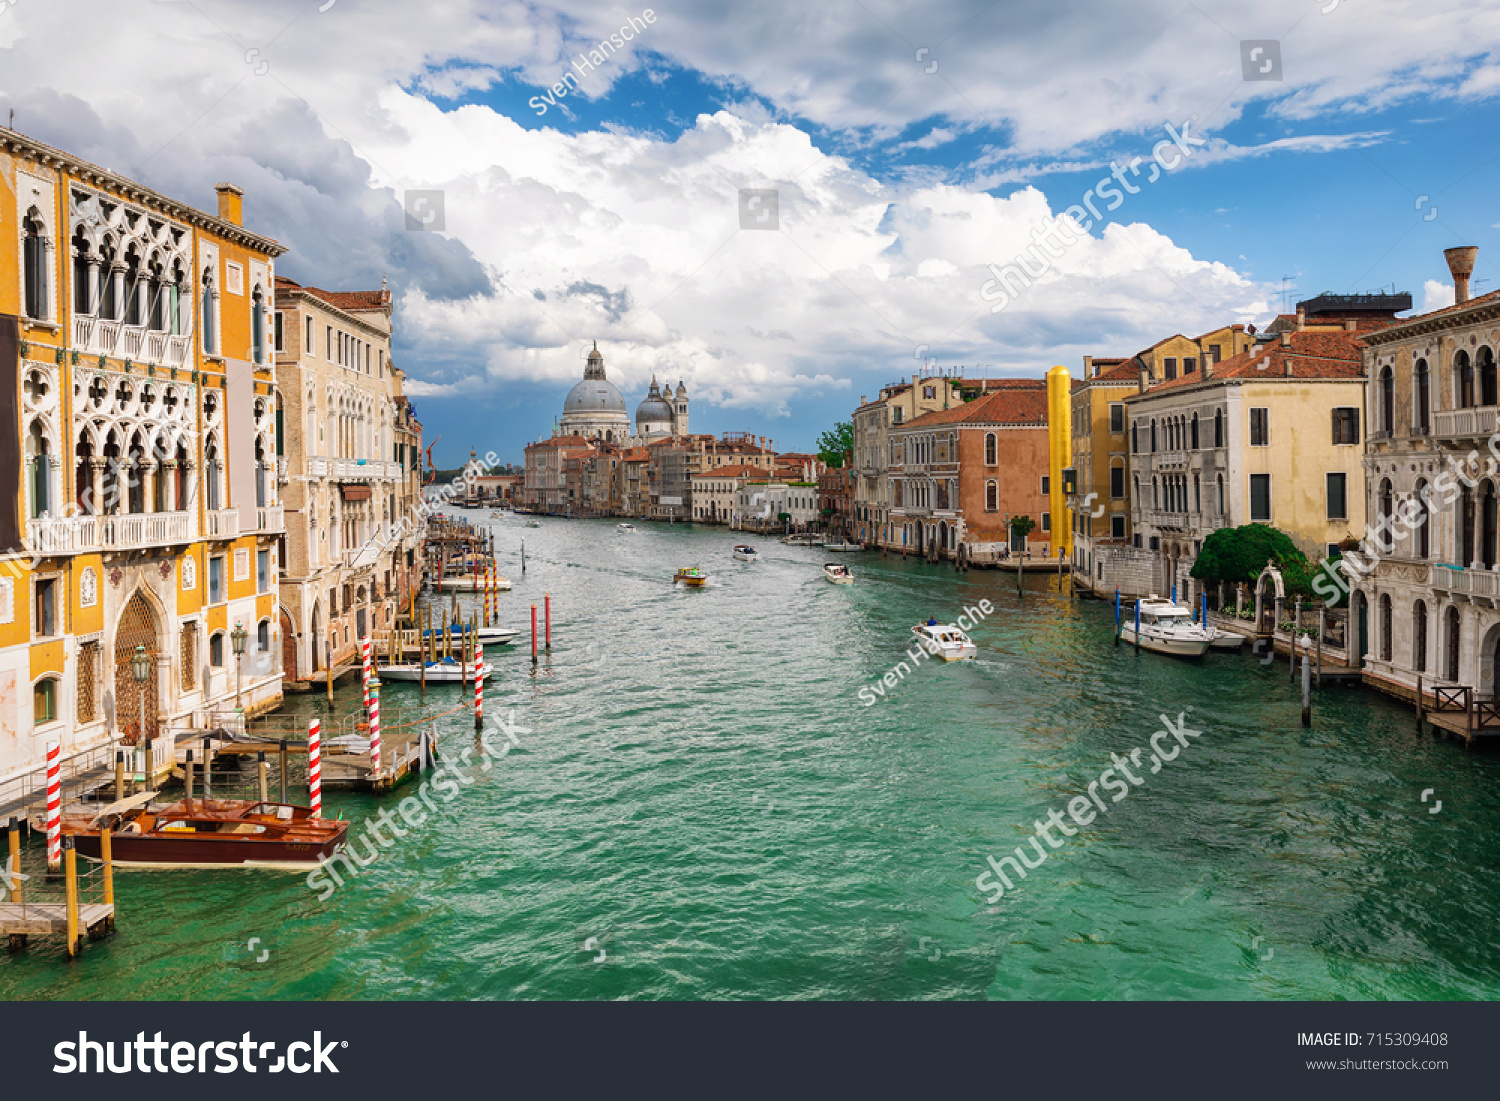 View to the Basilica di Santa Maria della Salute and Canale Grande in Venice, Italy, during a cloudy summer day #715309408